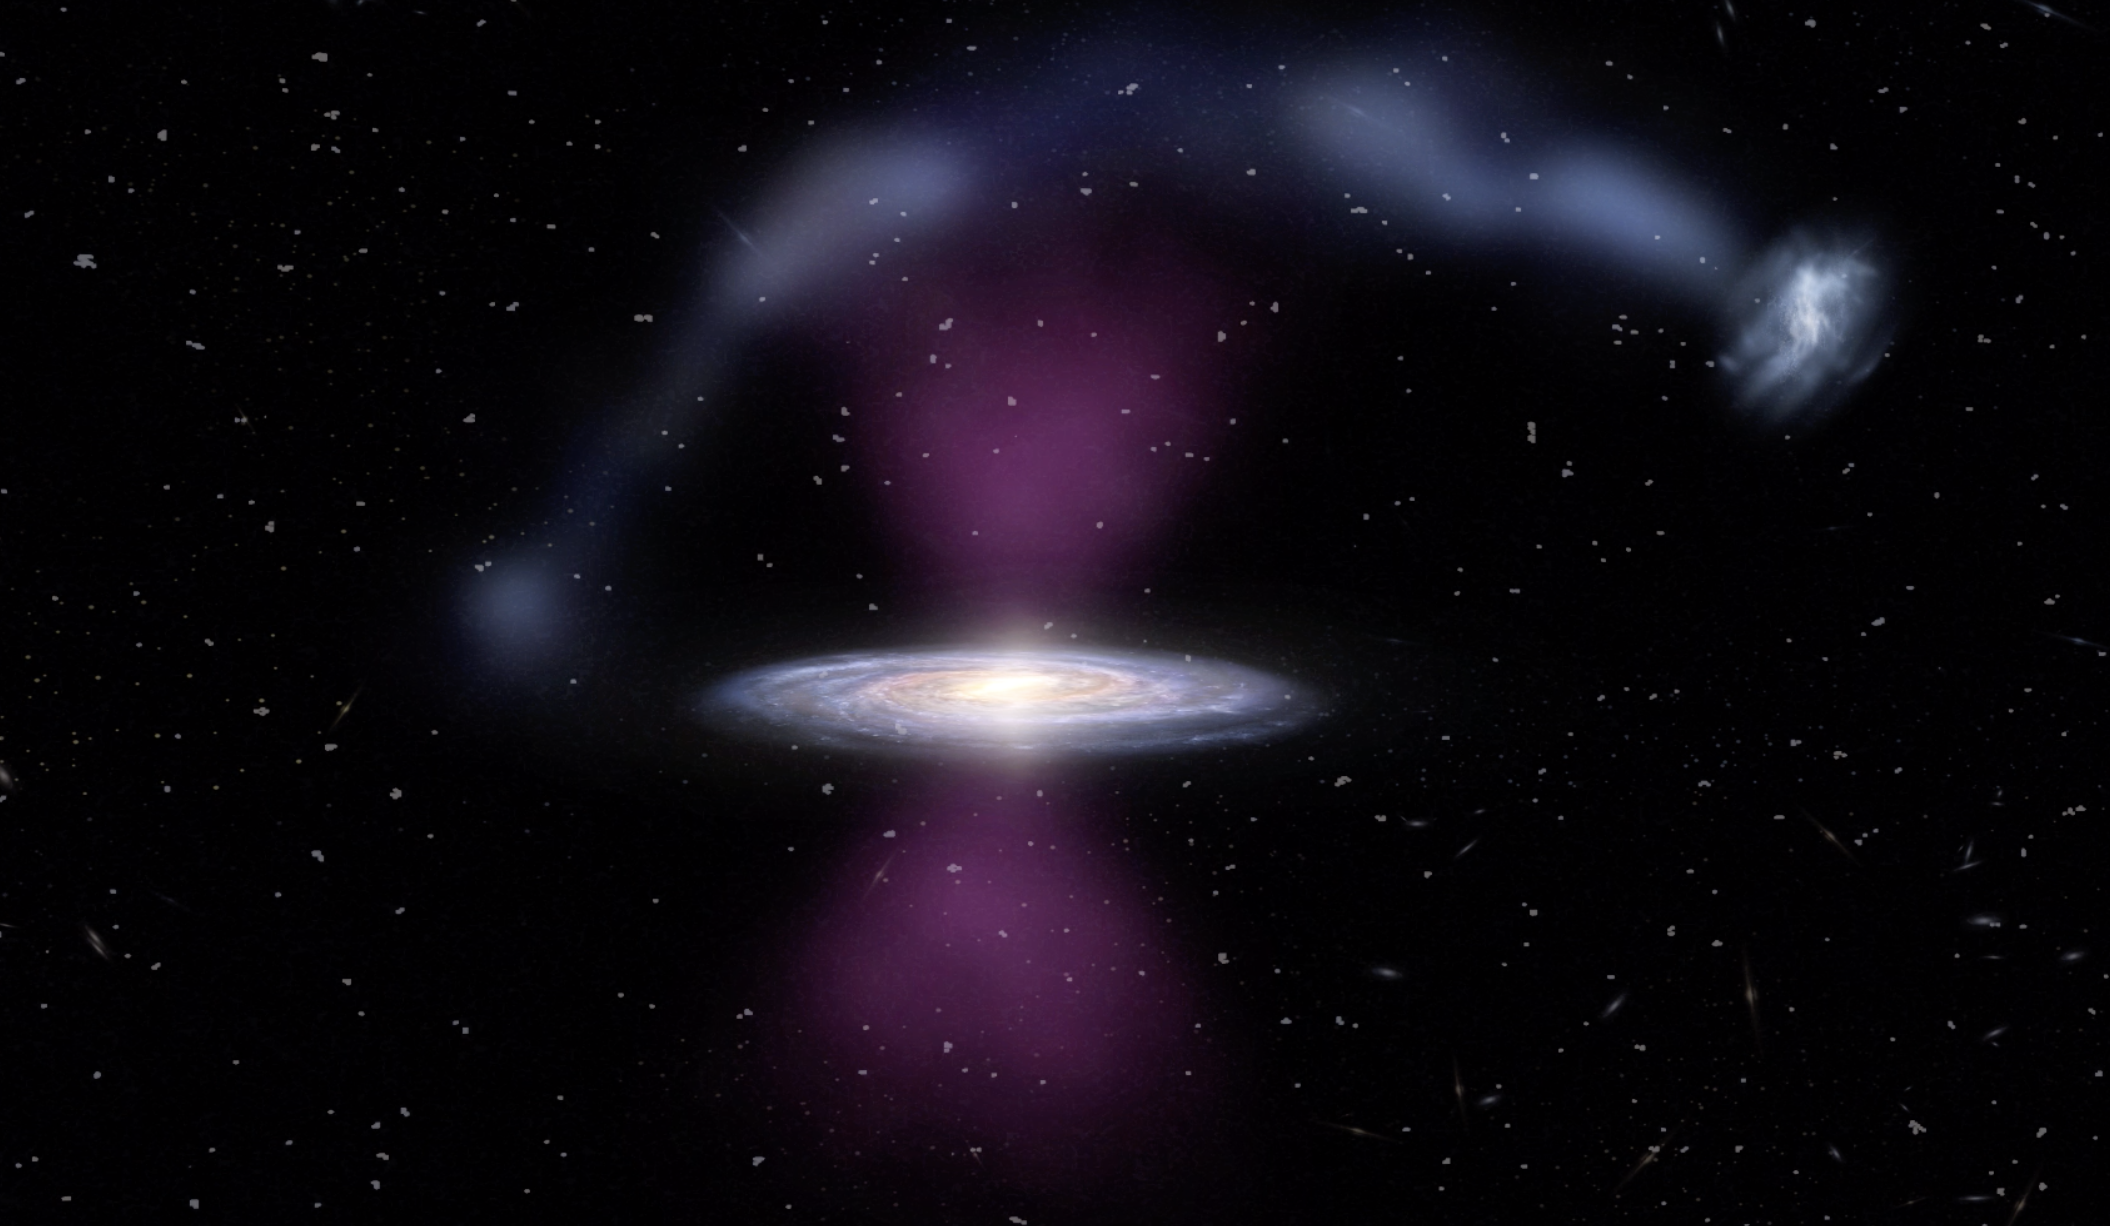 Edgewise galaxy with glowing purple blobs top and bottom, and a stream of material arcing over it.